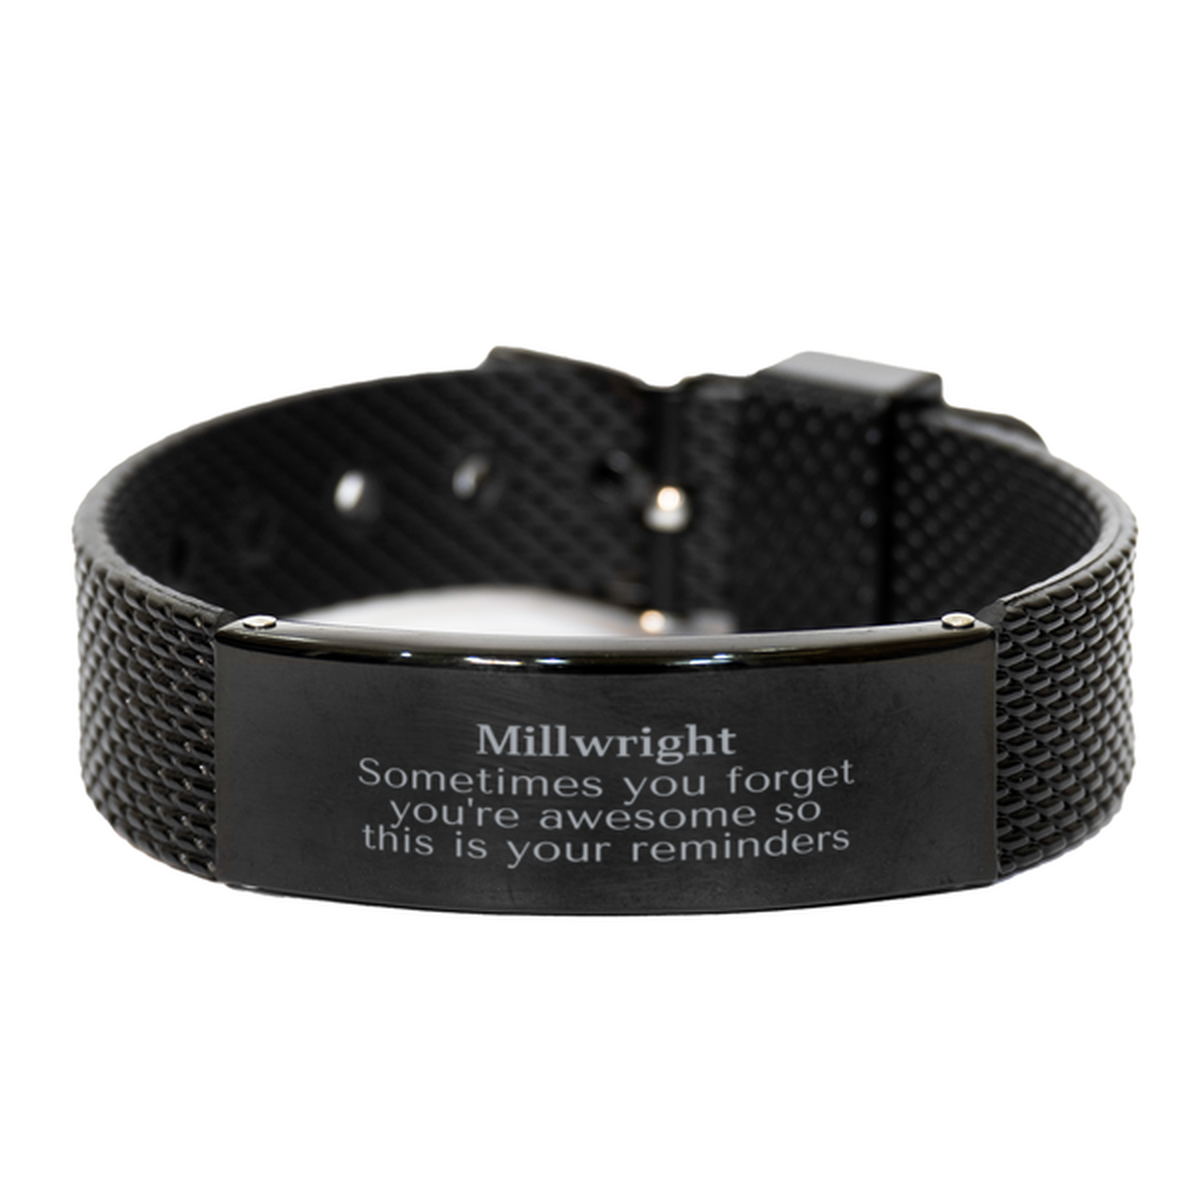 Sentimental Millwright Black Shark Mesh Bracelet, Millwright Sometimes you forget you're awesome so this is your reminders, Graduation Christmas Birthday Gifts for Millwright, Men, Women, Coworkers